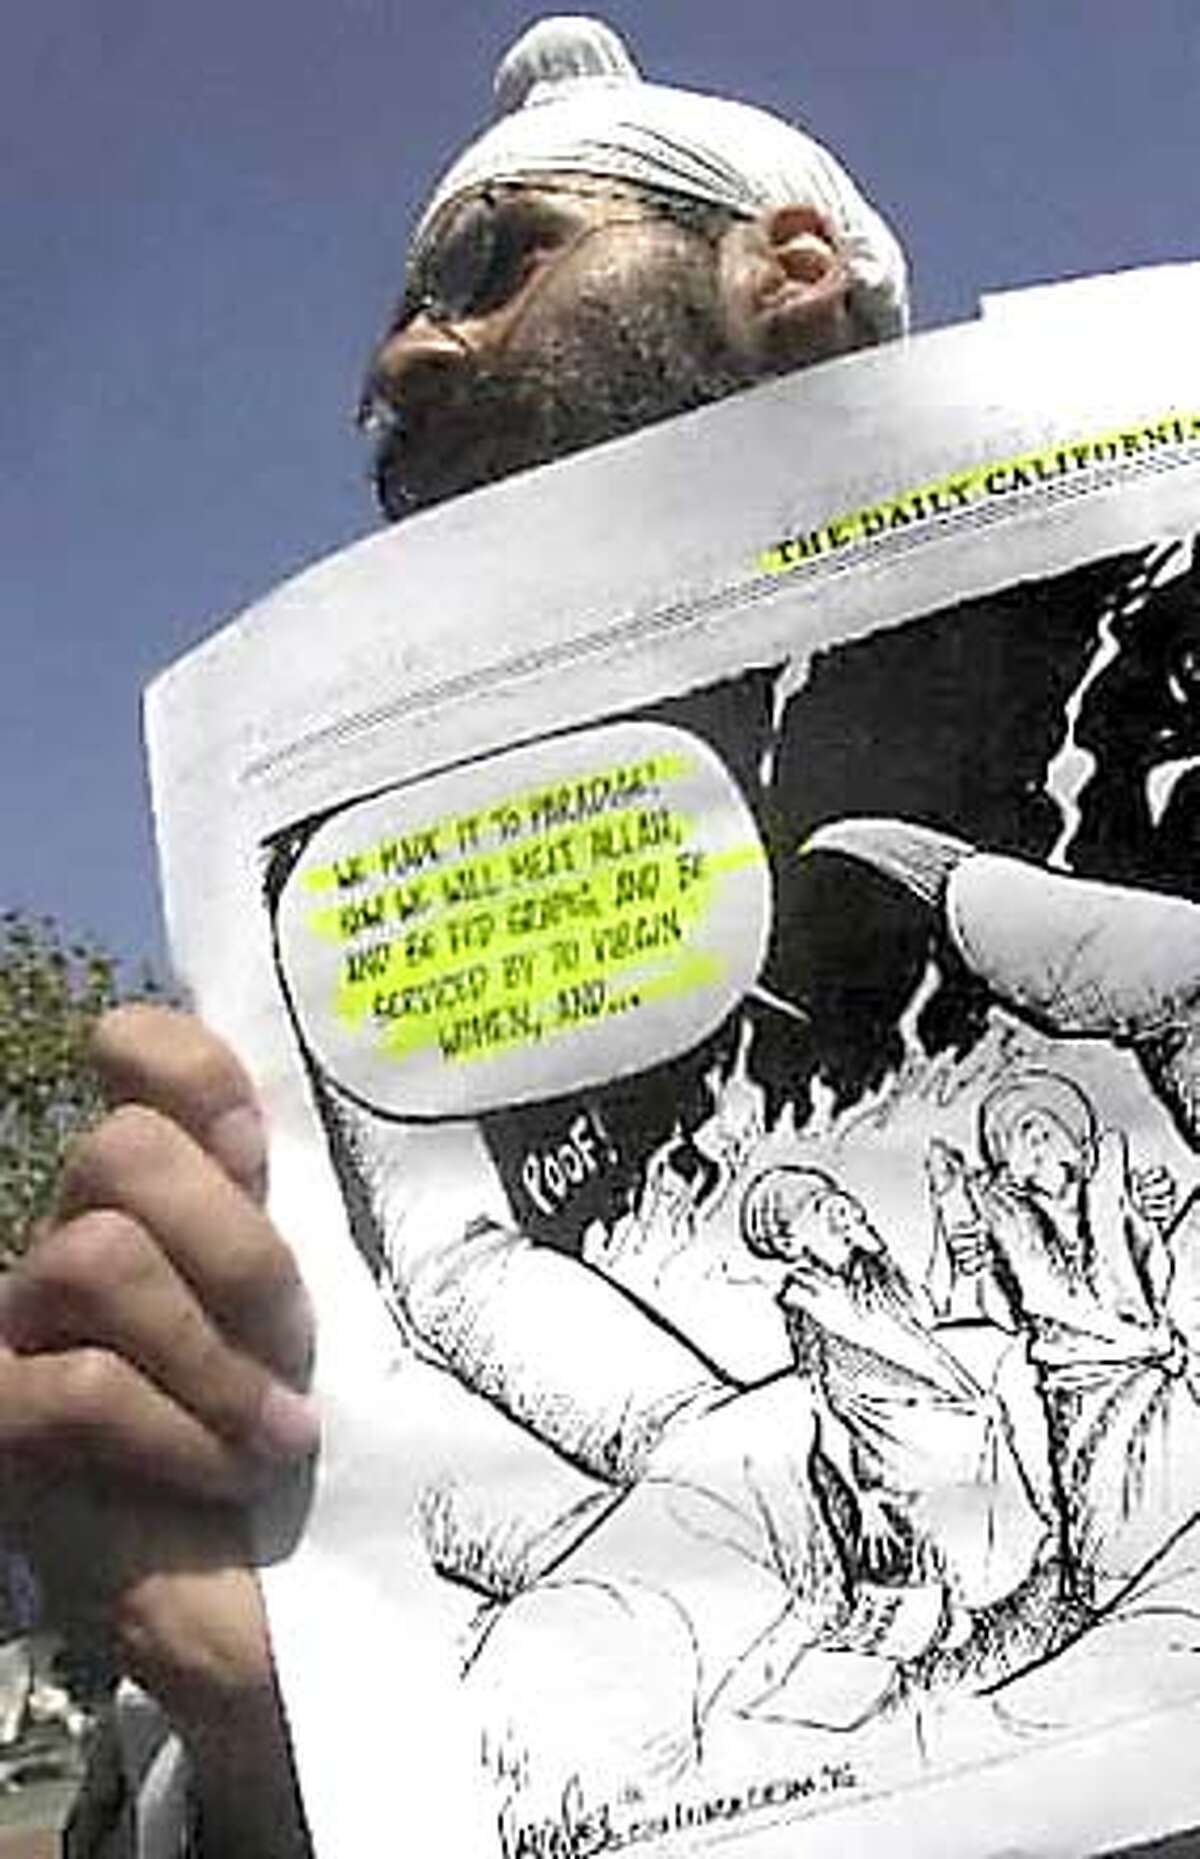 Muslims at UC protest cartoon in Daily Cal / 18 are cited; paper refuses to  issue apology